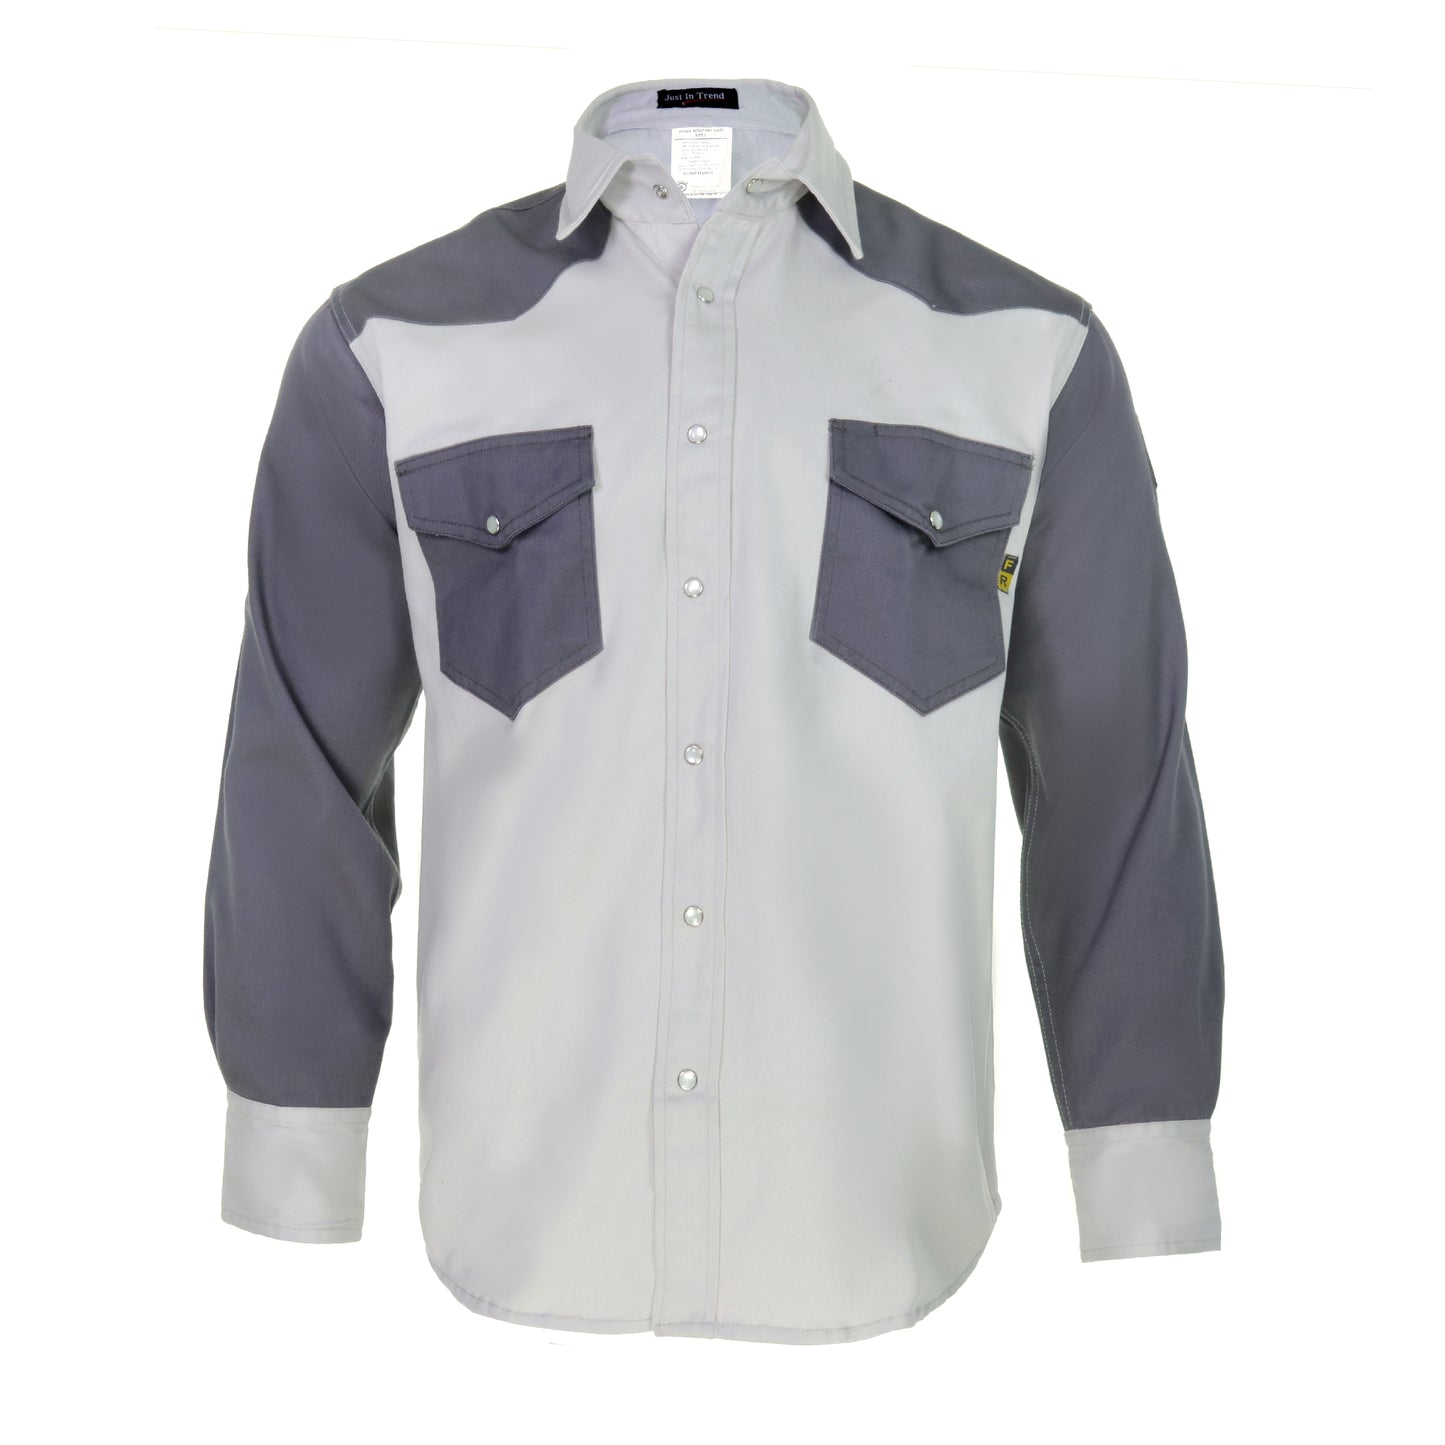 Flame Resistant FR Shirt - 88/12 - Western Style - Two Tone 7 oz